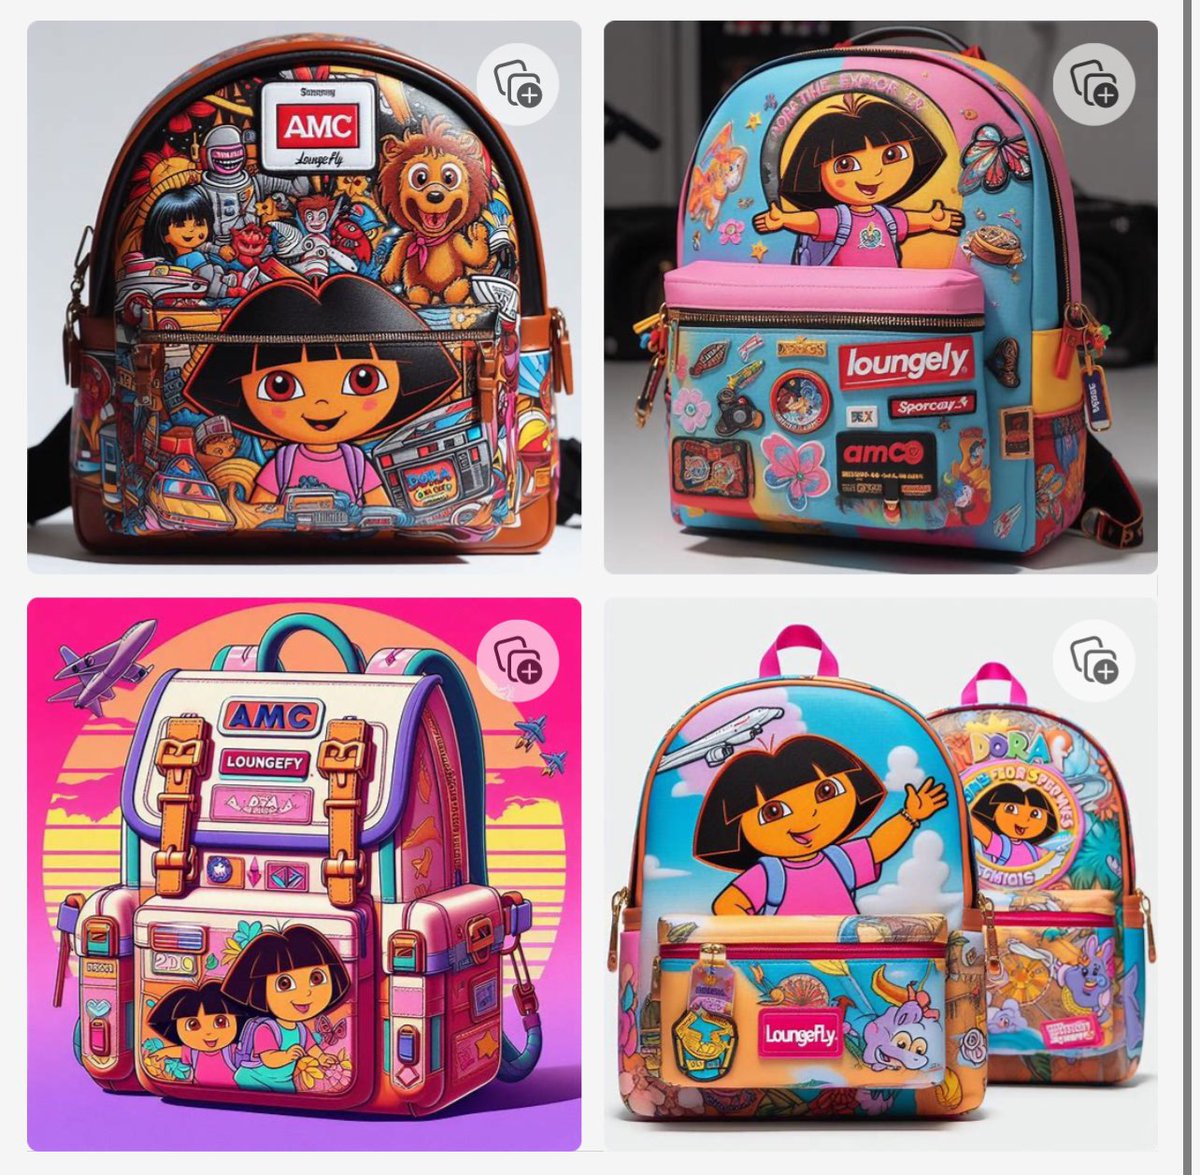 You guys know what Dora uses everyday? The potential @AMCTheatres and @Loungefly @DoraTheExplorer backpack in the upcoming live-action film. @CEOAdam @amcideasgroup #atamc #amc #AMCShop